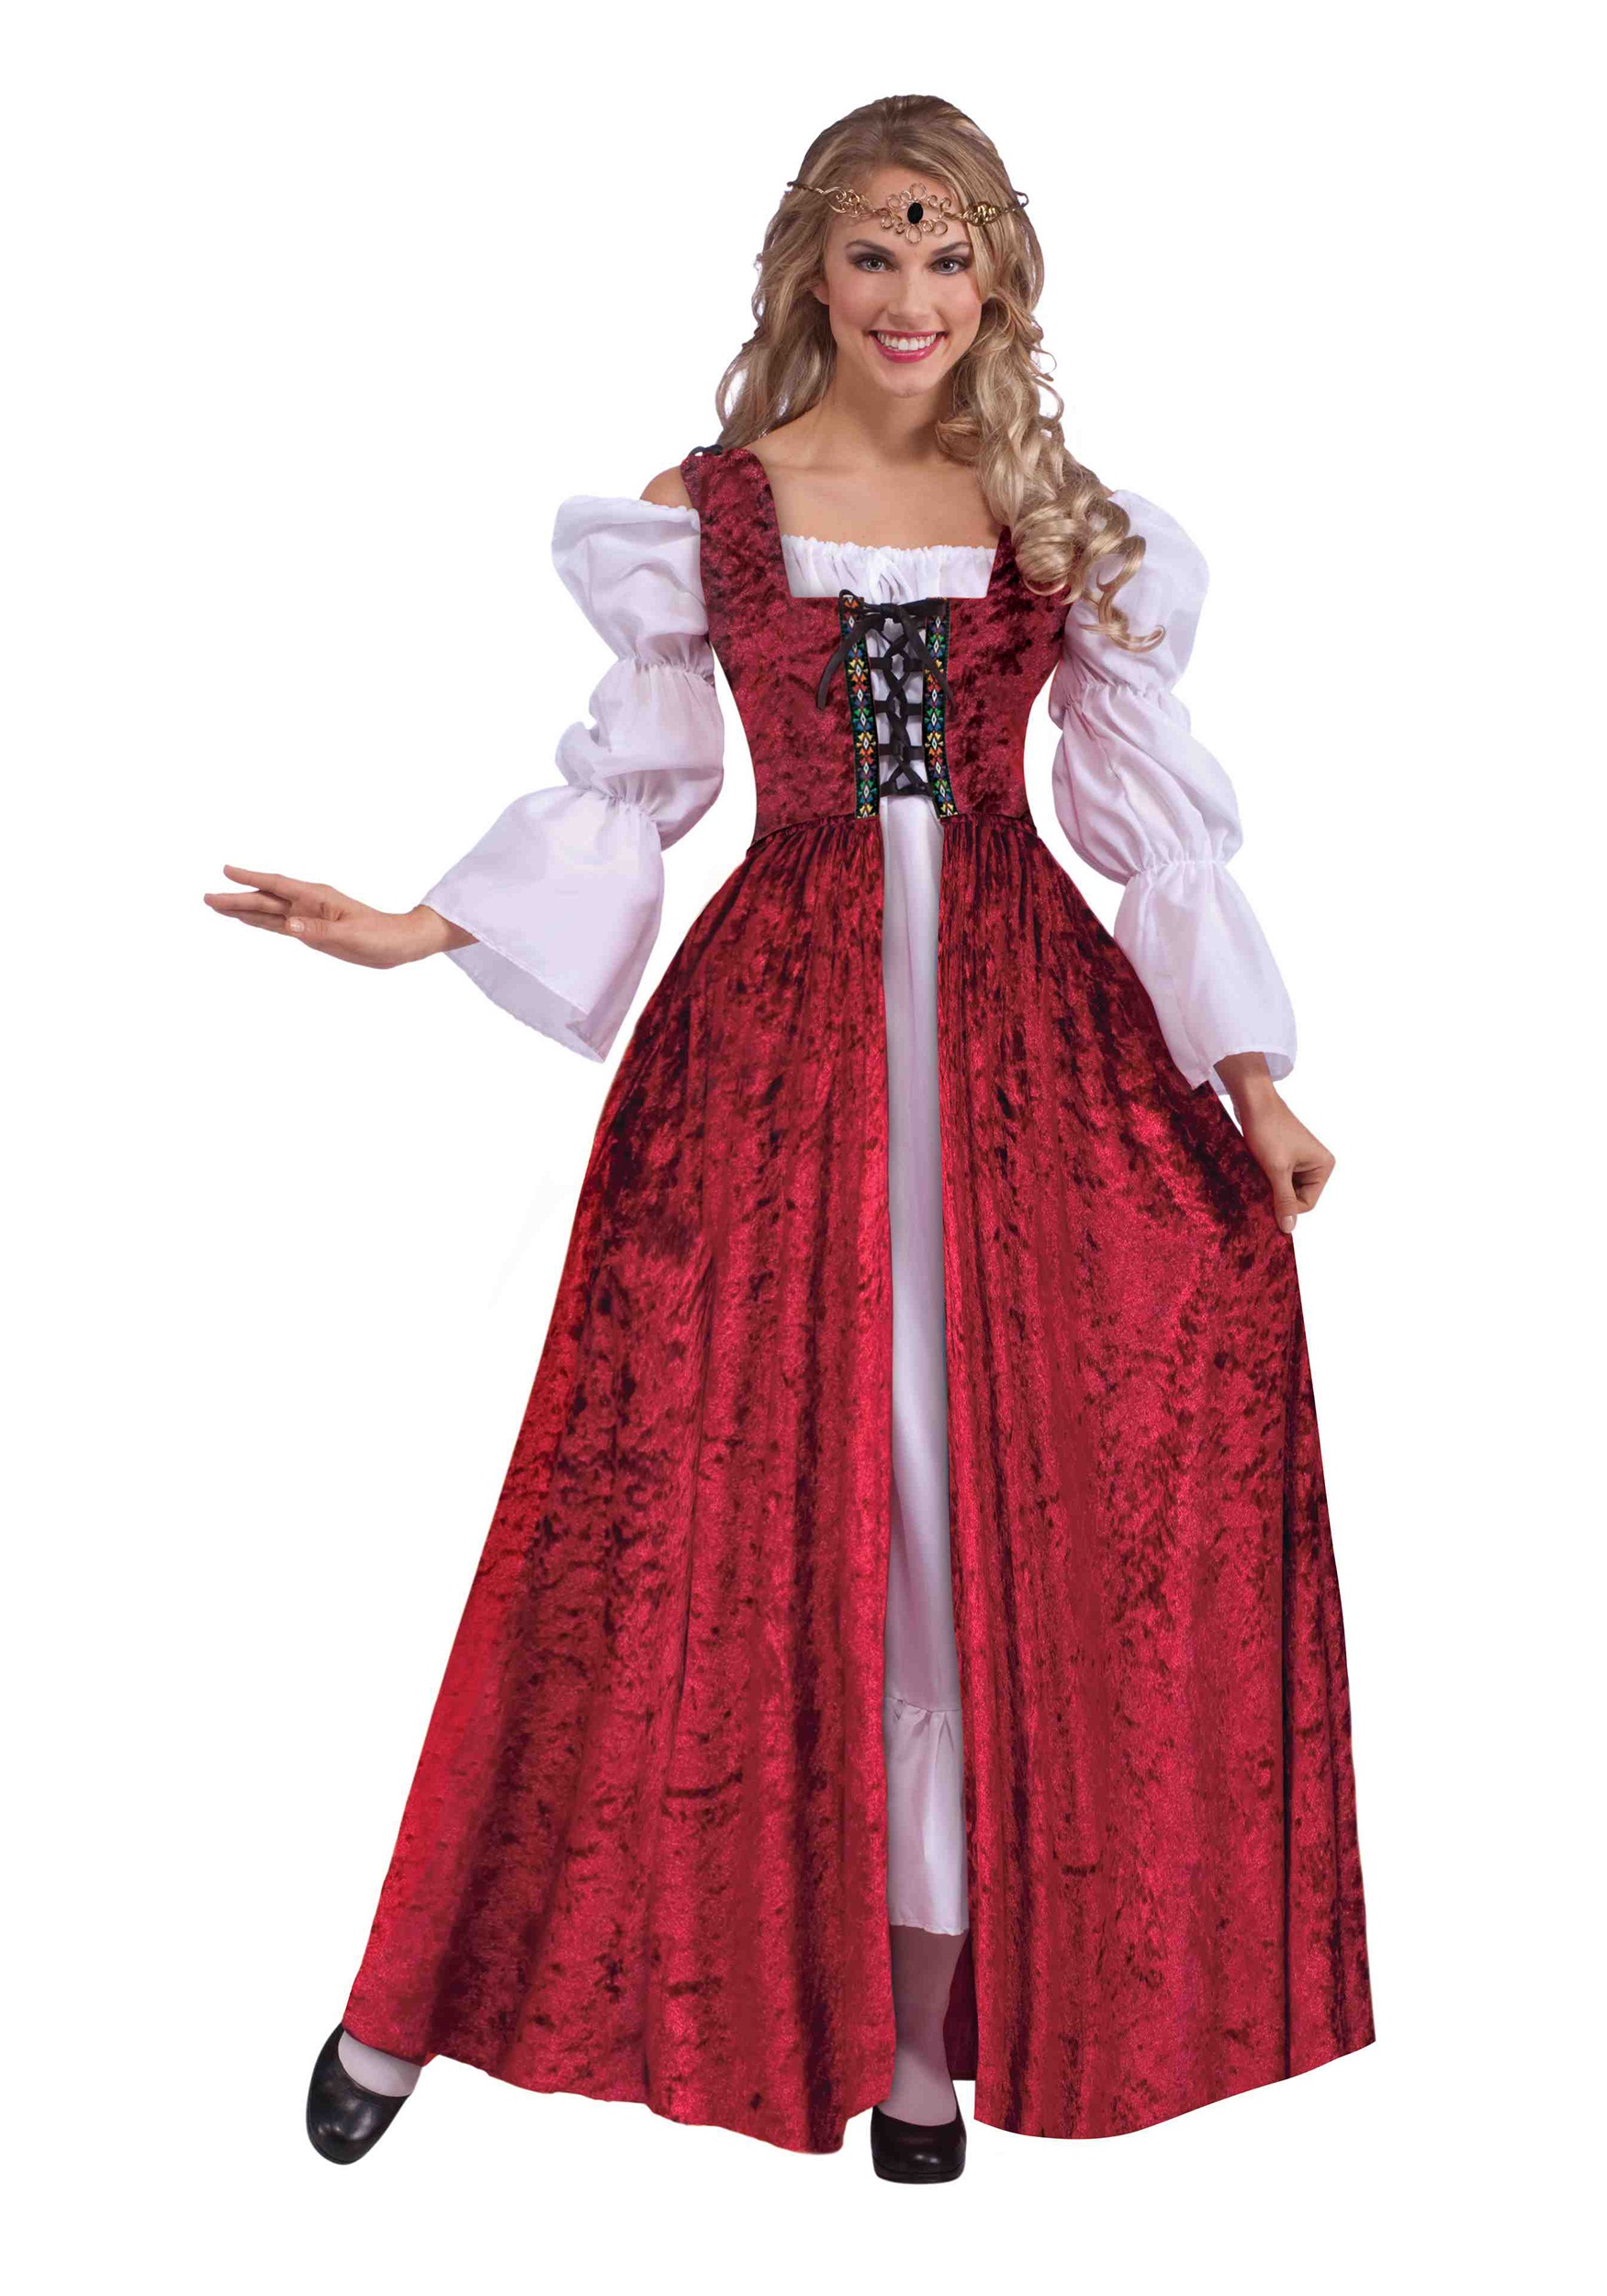 Women's Cocktail Dresses Long Sleeve Victorian Ball Gown Plus Size Medieval Costume Corset Lacing Can Be Cinched 